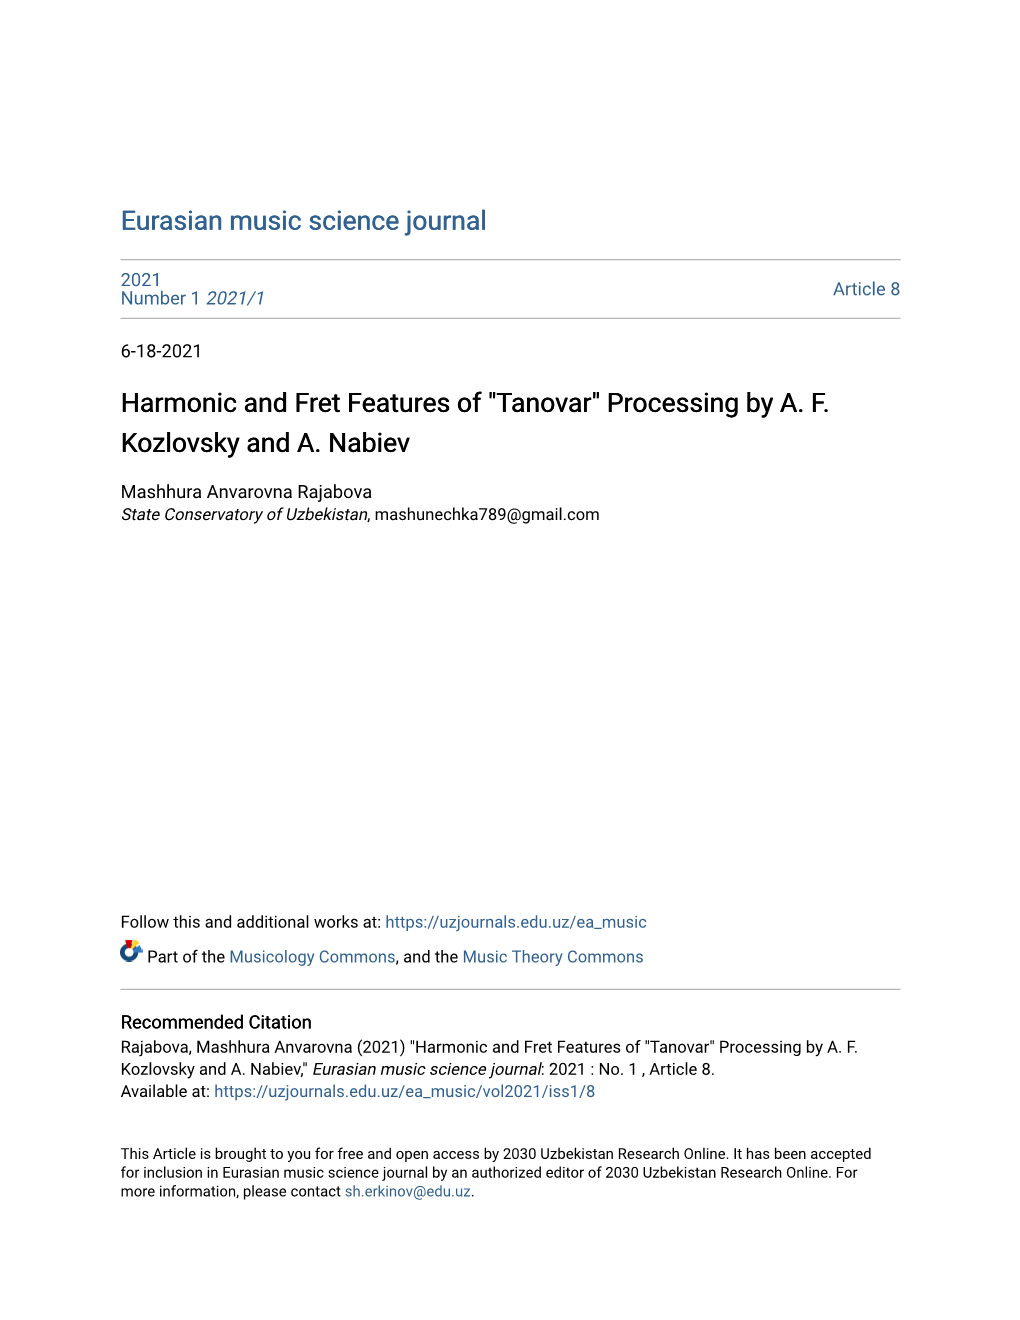 Harmonic and Fret Features of "Tanovar" Processing by A. F. Kozlovsky and A